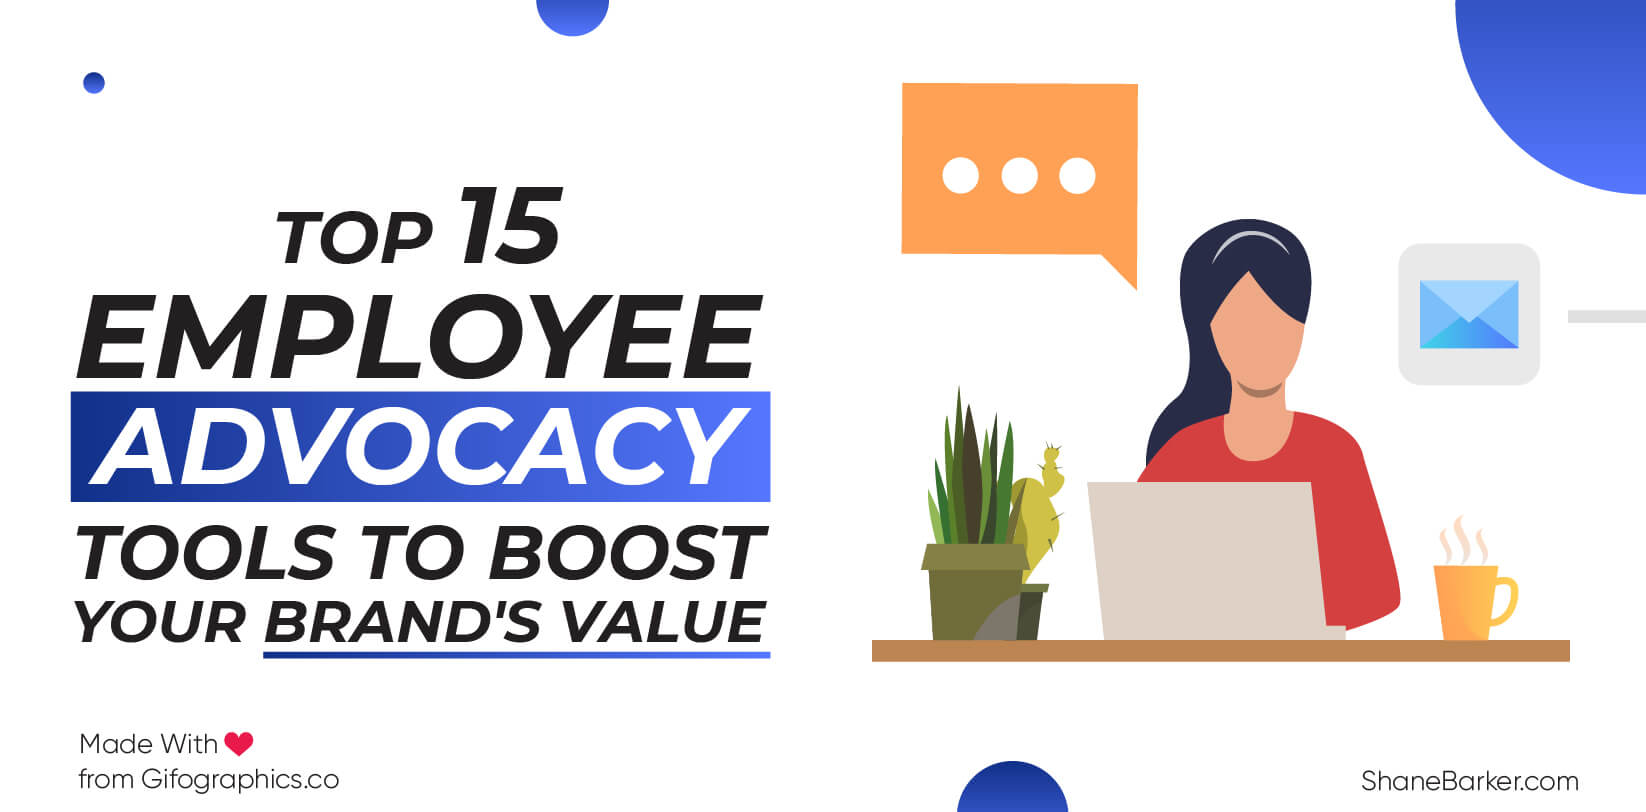 Top 15 Employee Advocacy Tools to Boost Your Brand’s Value